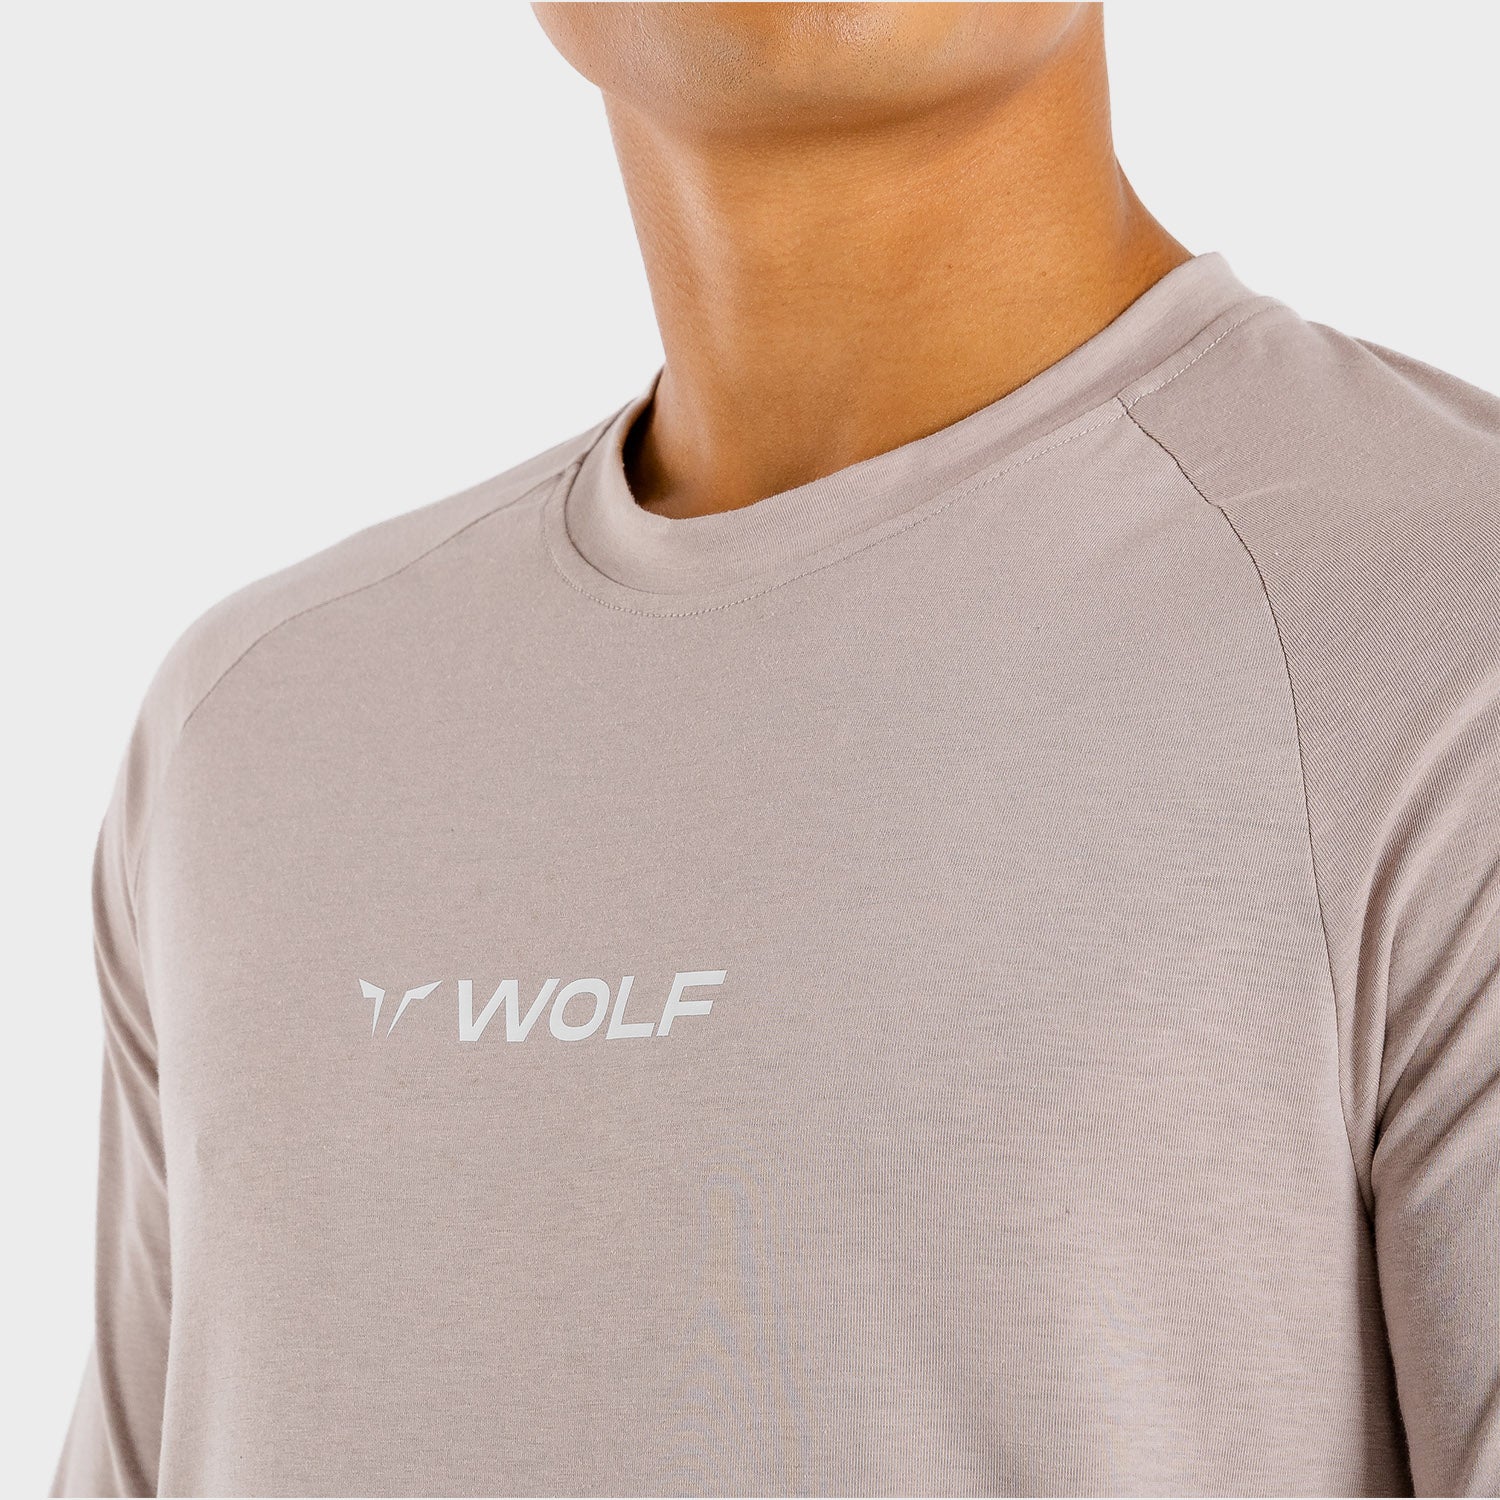 squatwolf-workout-shirts-for-men-primal-long-sleeve-tee-greige-gym-wear